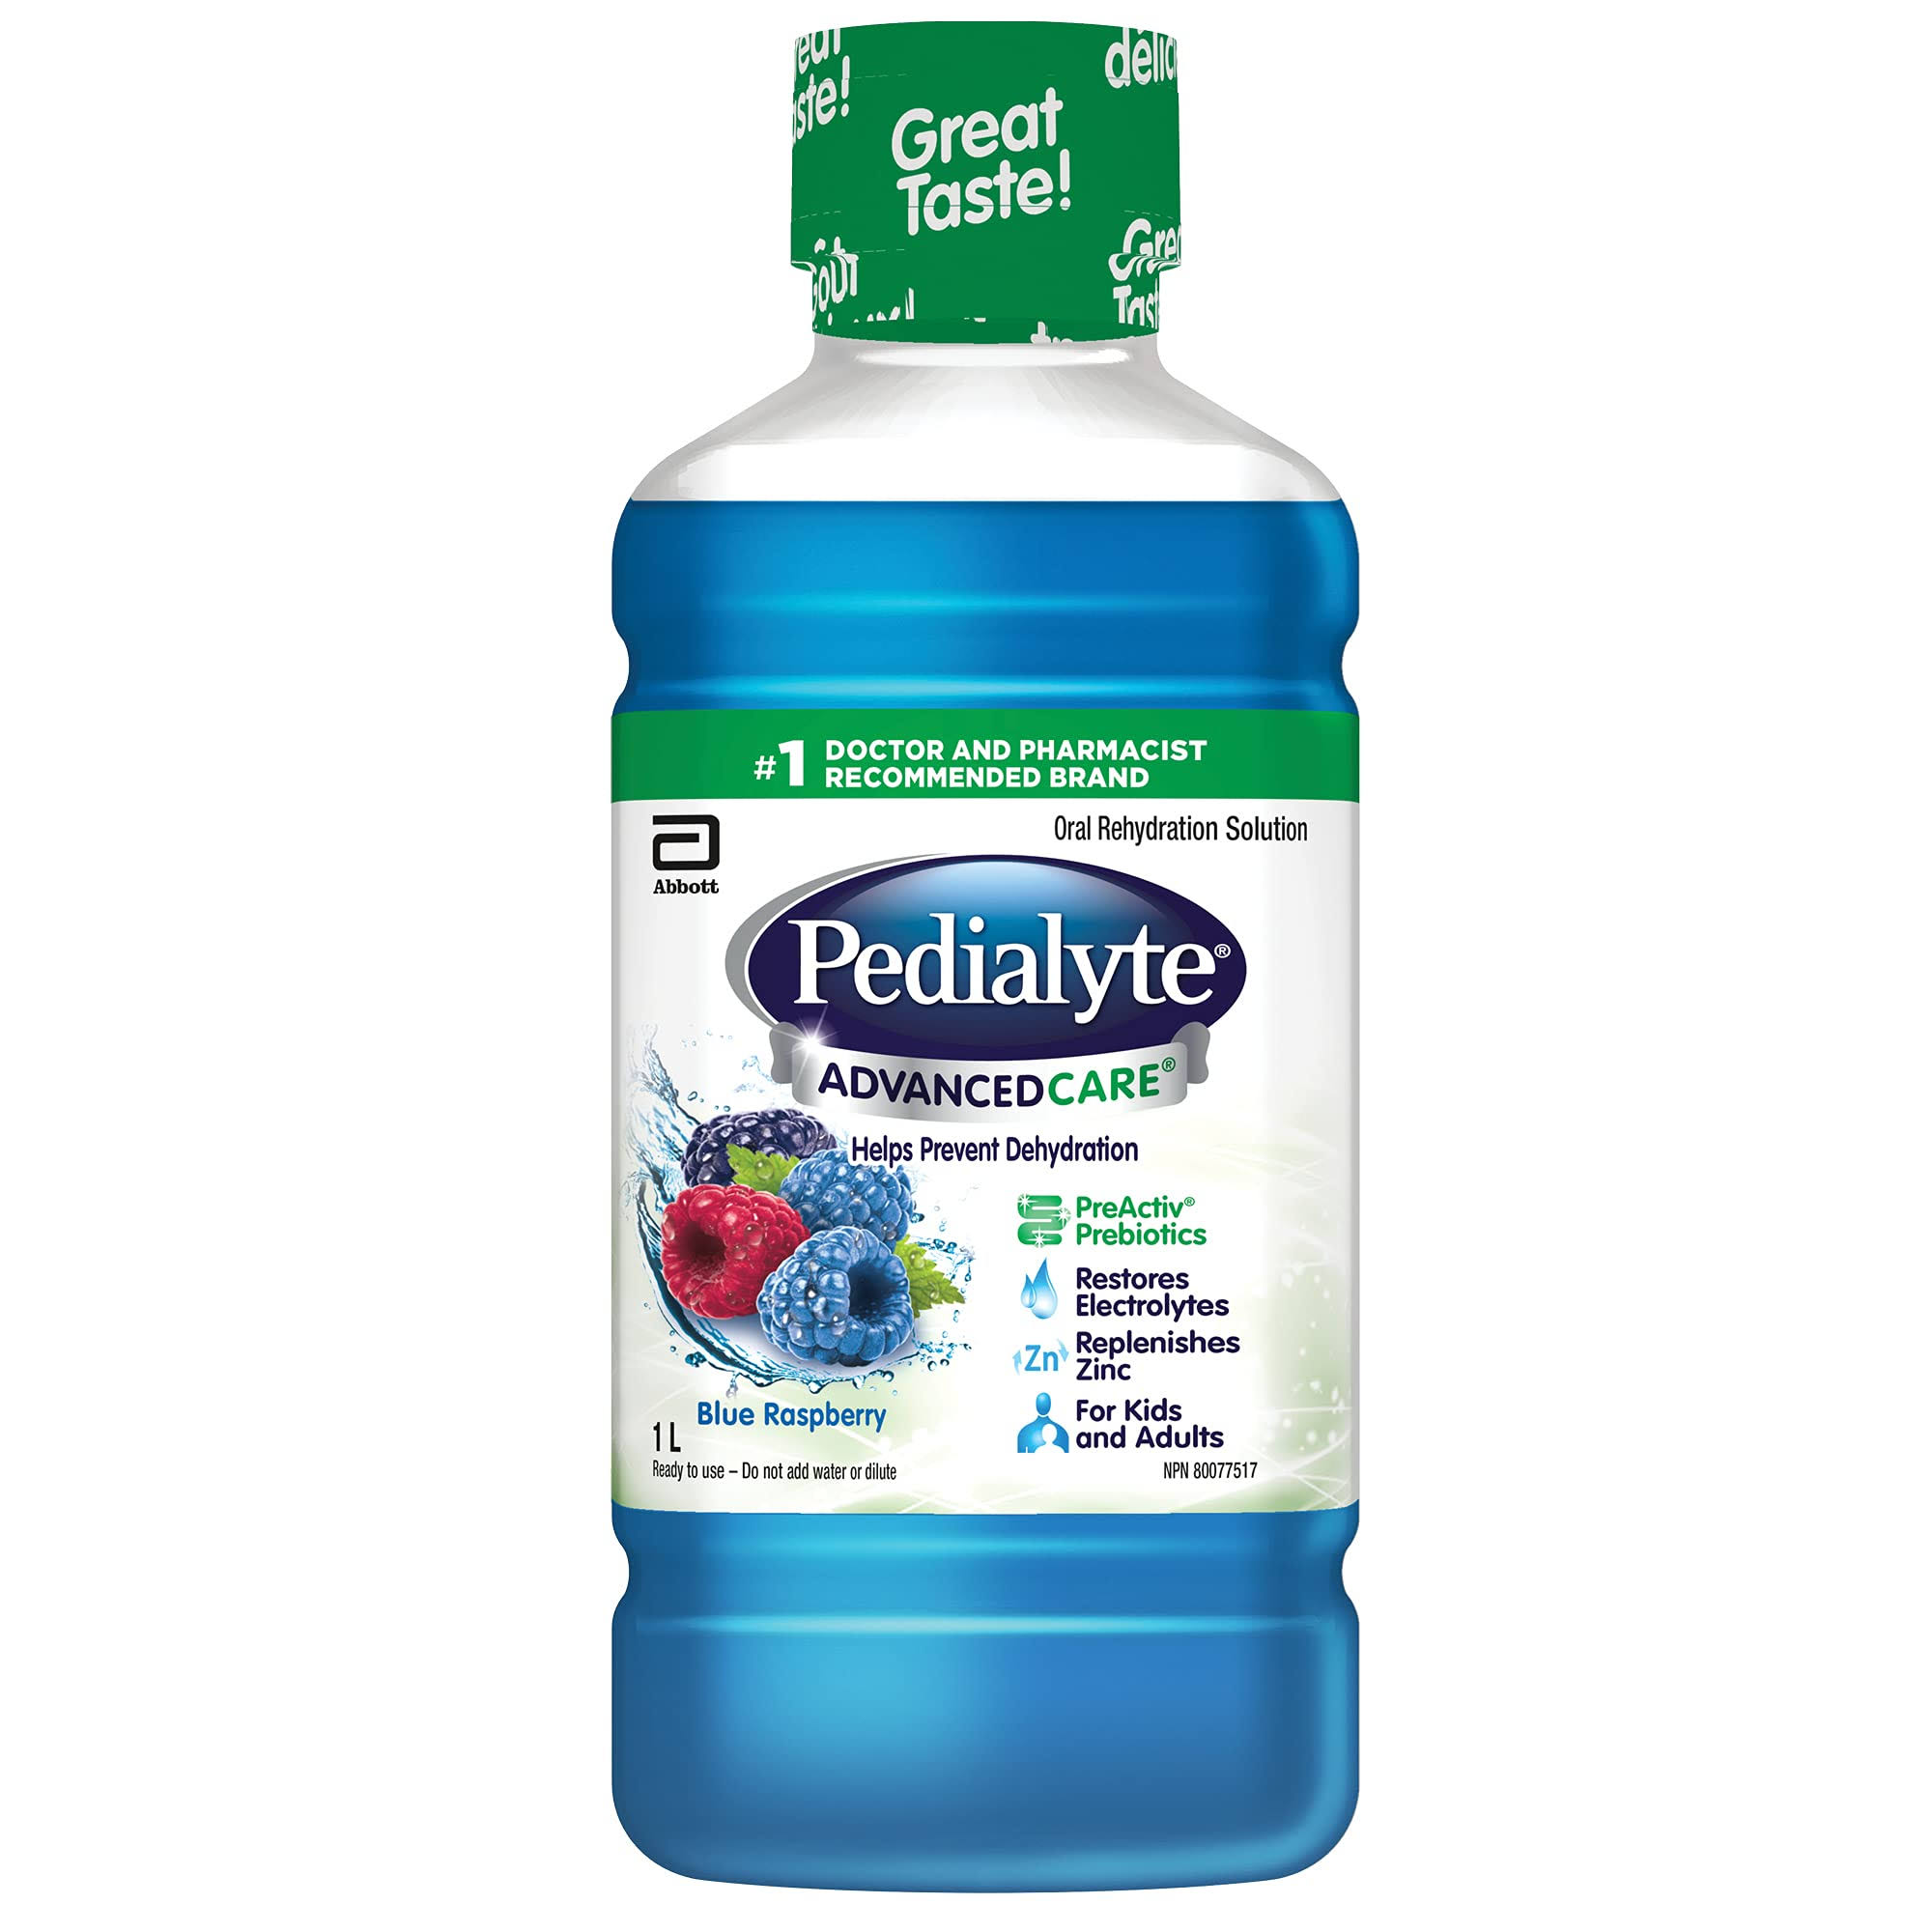 Pedialyte Advanced Care Oral Rehydration Solution - Blue Raspberry, 1L